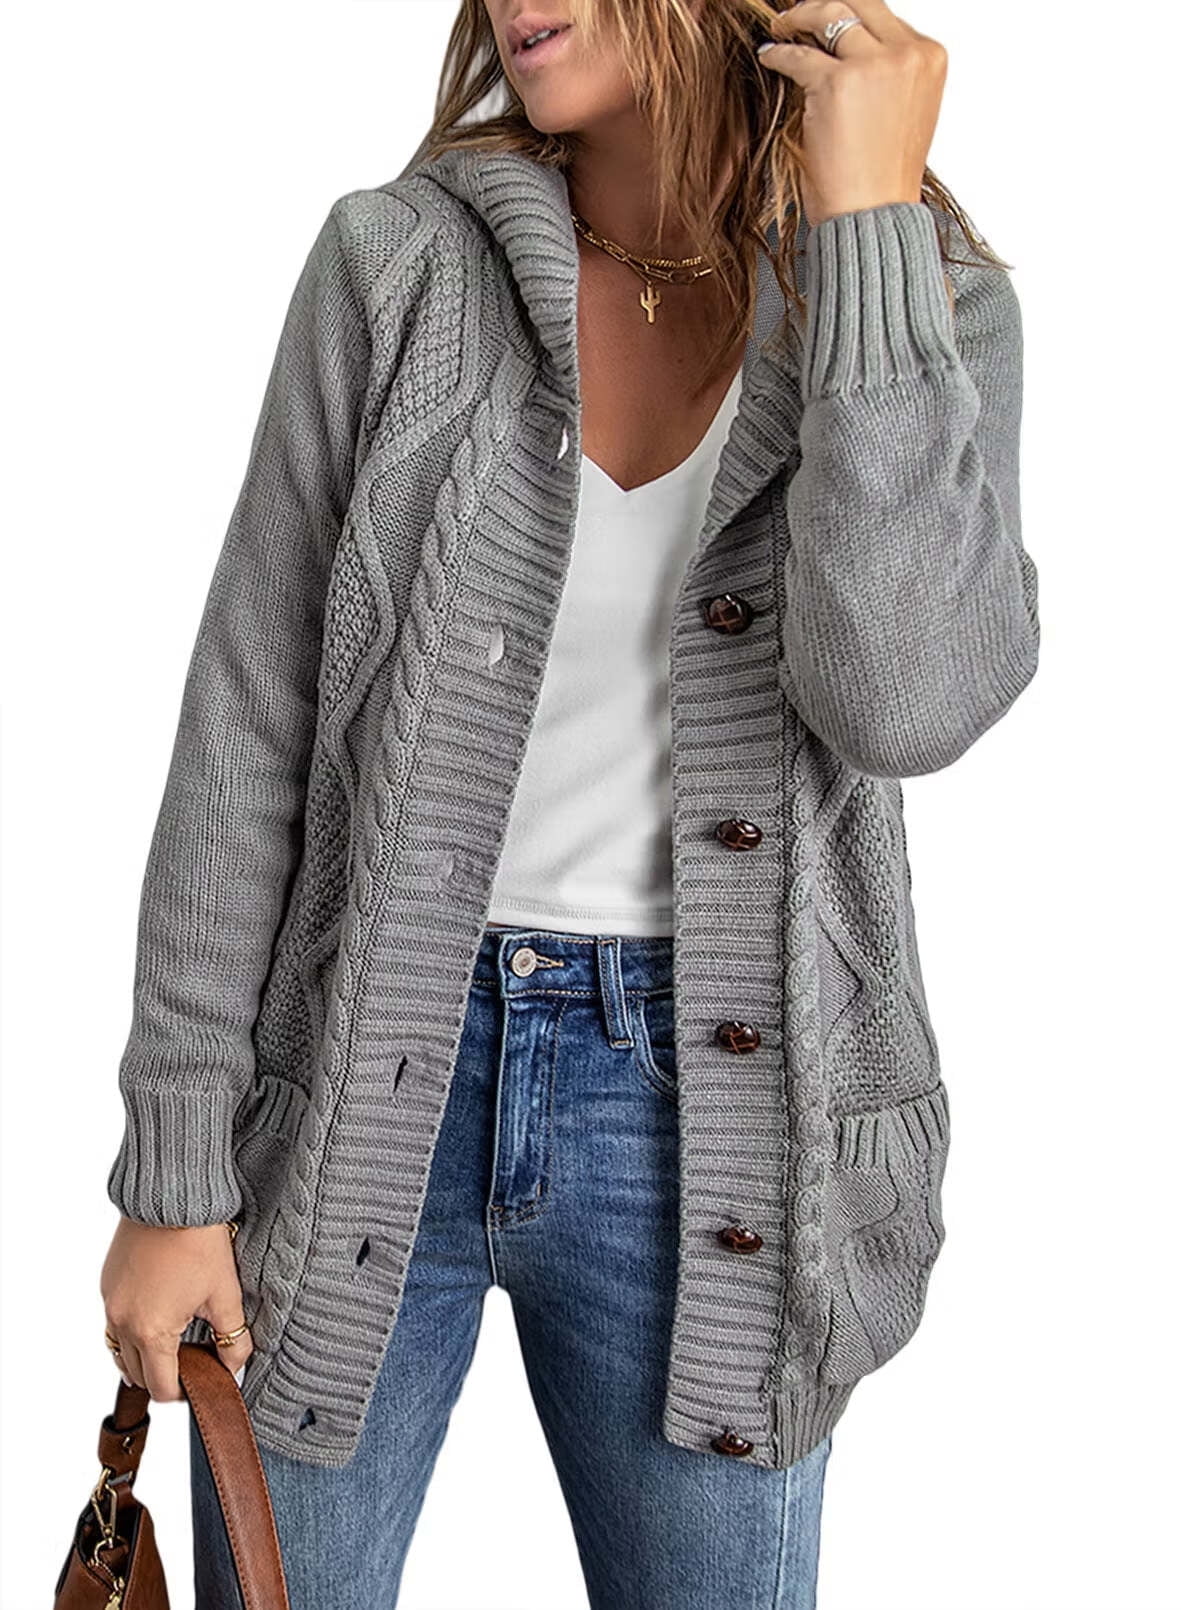 Eytino Hooded Cardigan Sweaters for Women Long Sleeve Button Down Knit  Sweater Coat Outwear with Pockets